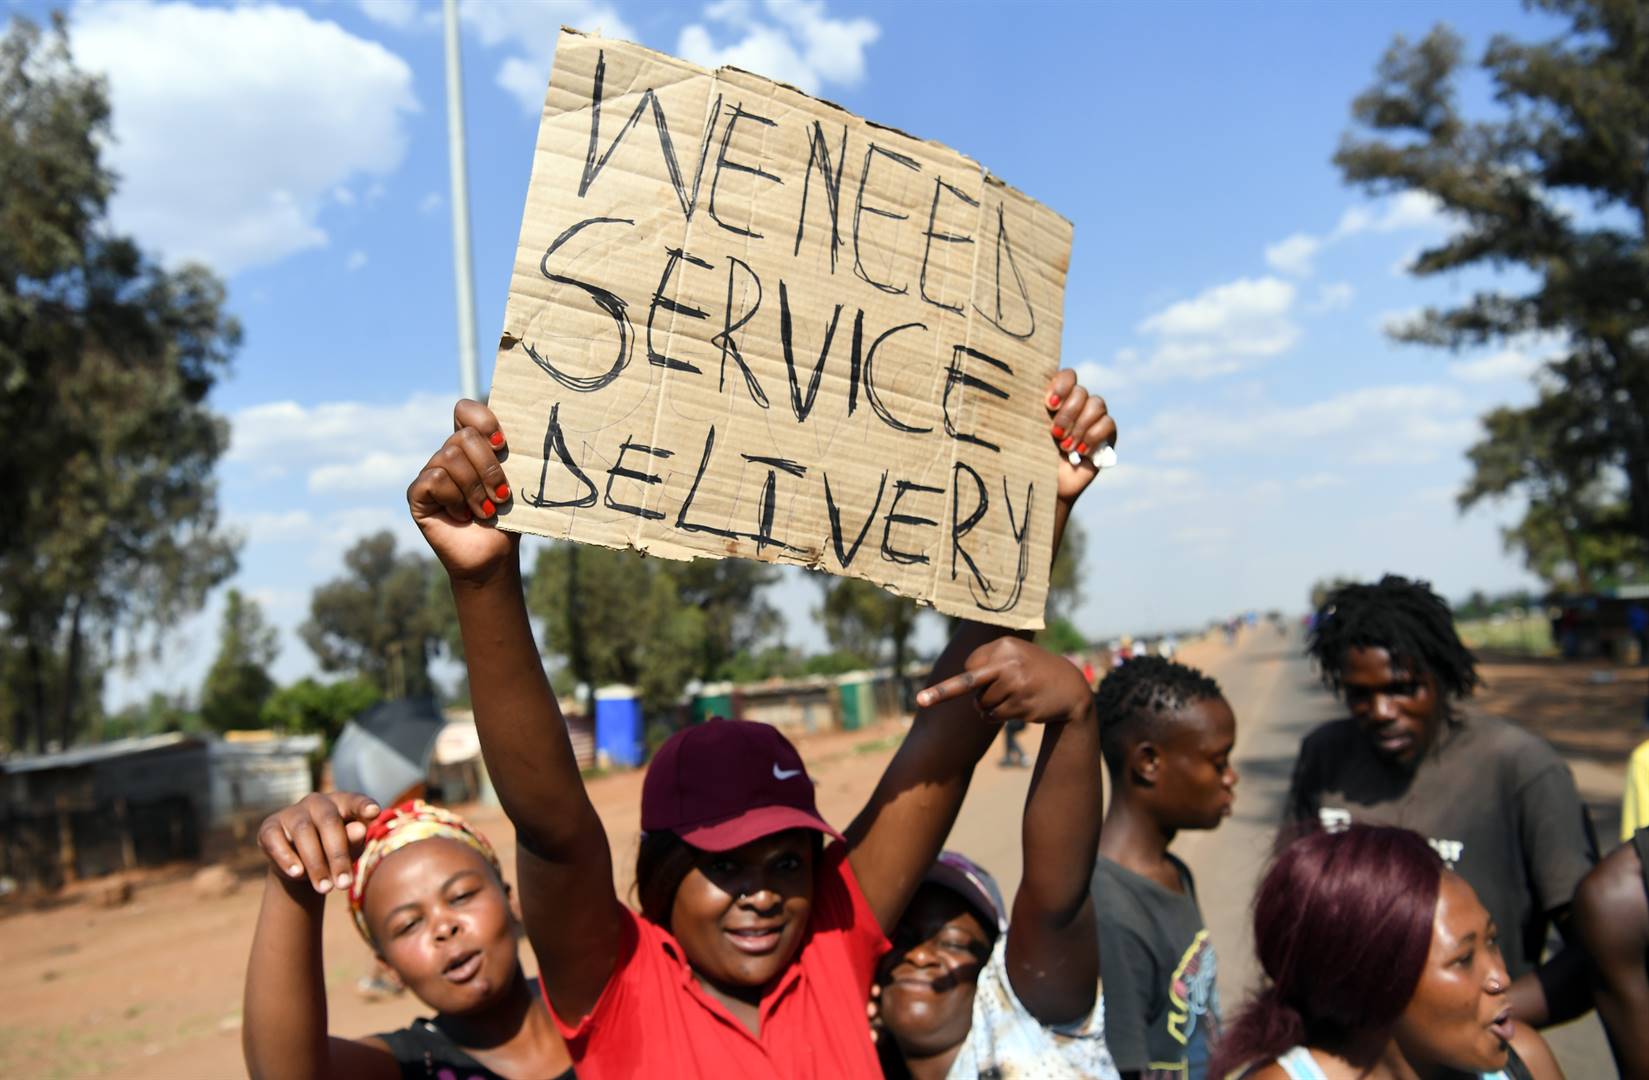 Residents take to the streets to protest for decent service delivery in their communities as more municipalities are dysfunctional. Photo: Felix Dlangamandla